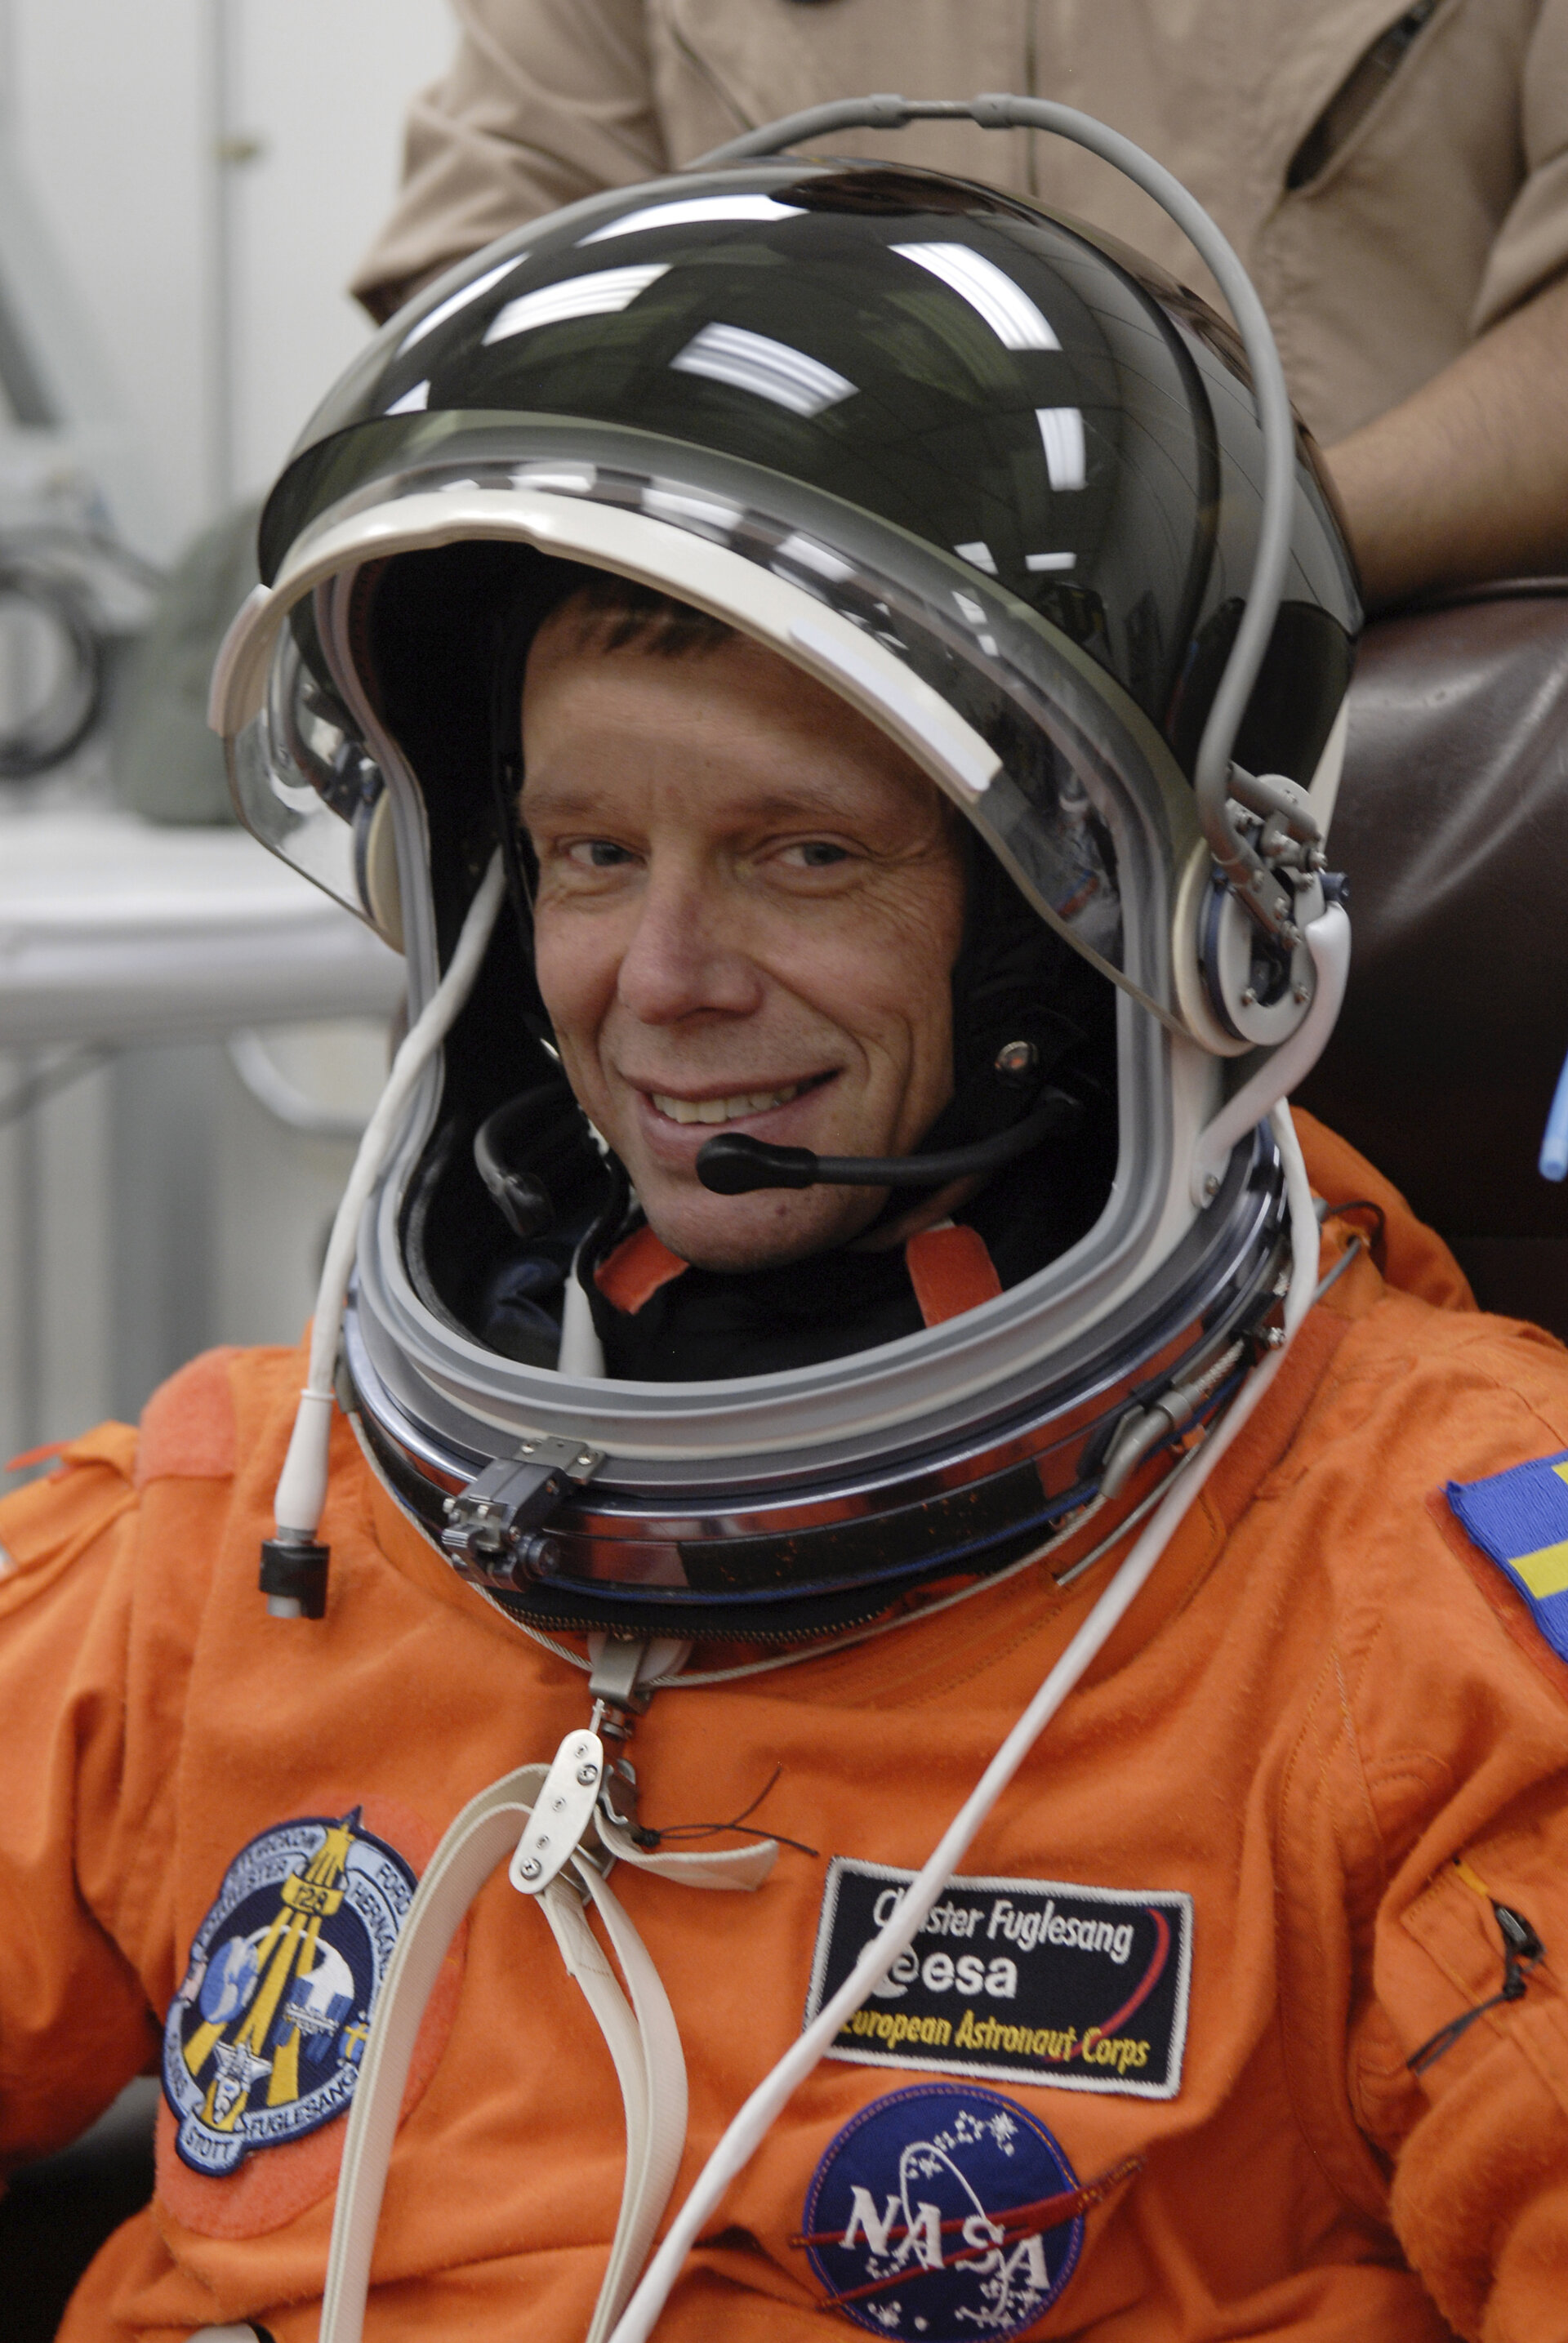 Christer Fuglesang suits up before heading to Launch Pad 39A